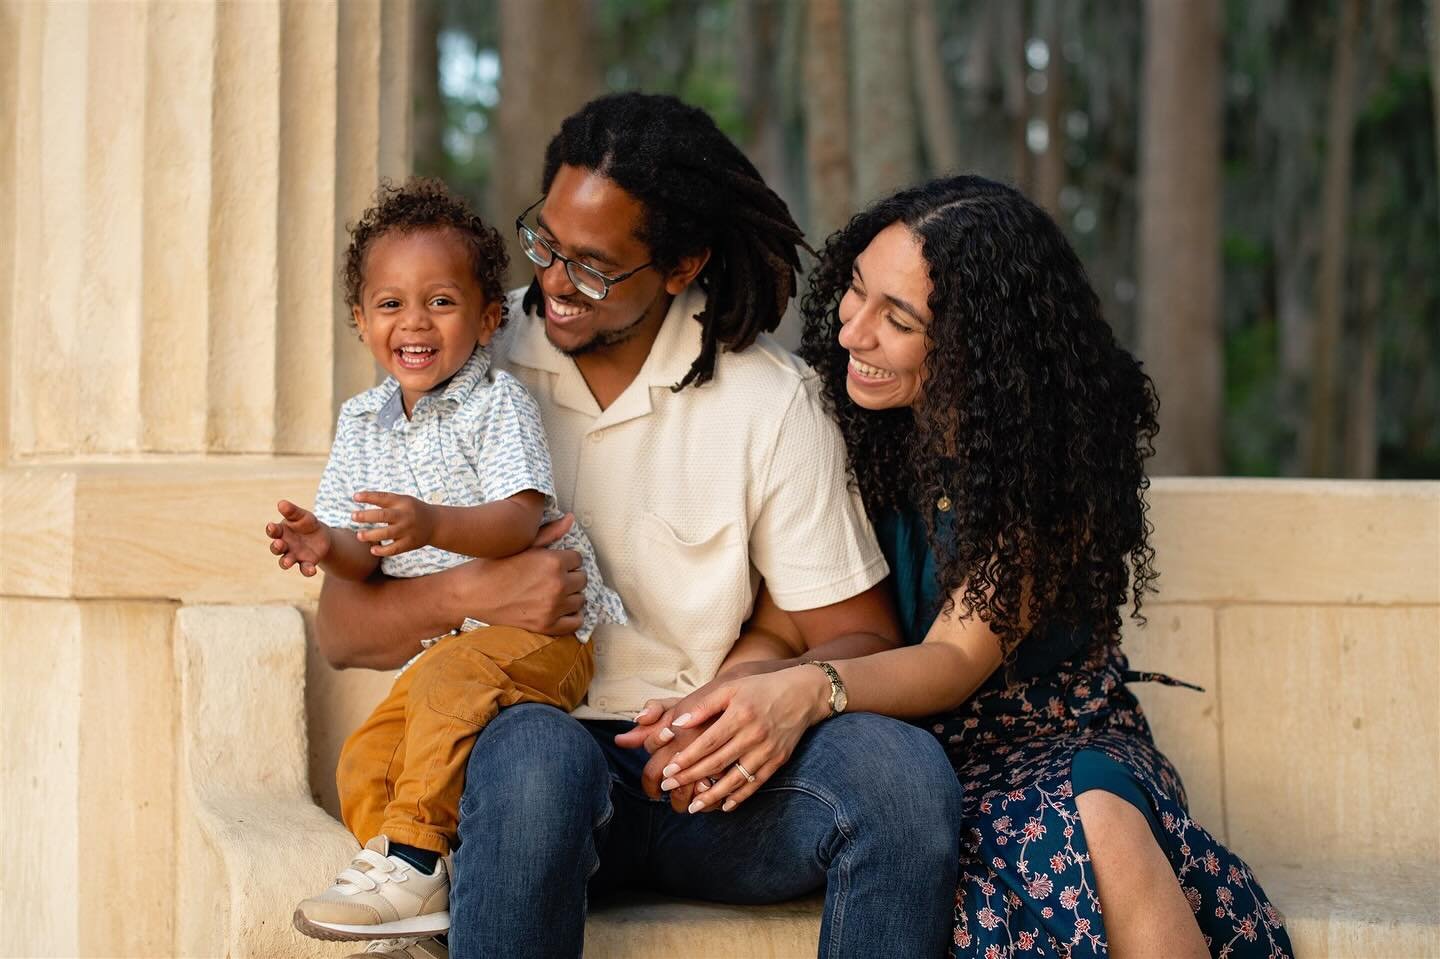 Capturing these precious family moments is everything! Little one&rsquo;s laughter, cozy cuddles, and memories made together are the heartbeats of our family. 💖 #FamilyFirst #CherishedMoments #LoveInEveryFrame